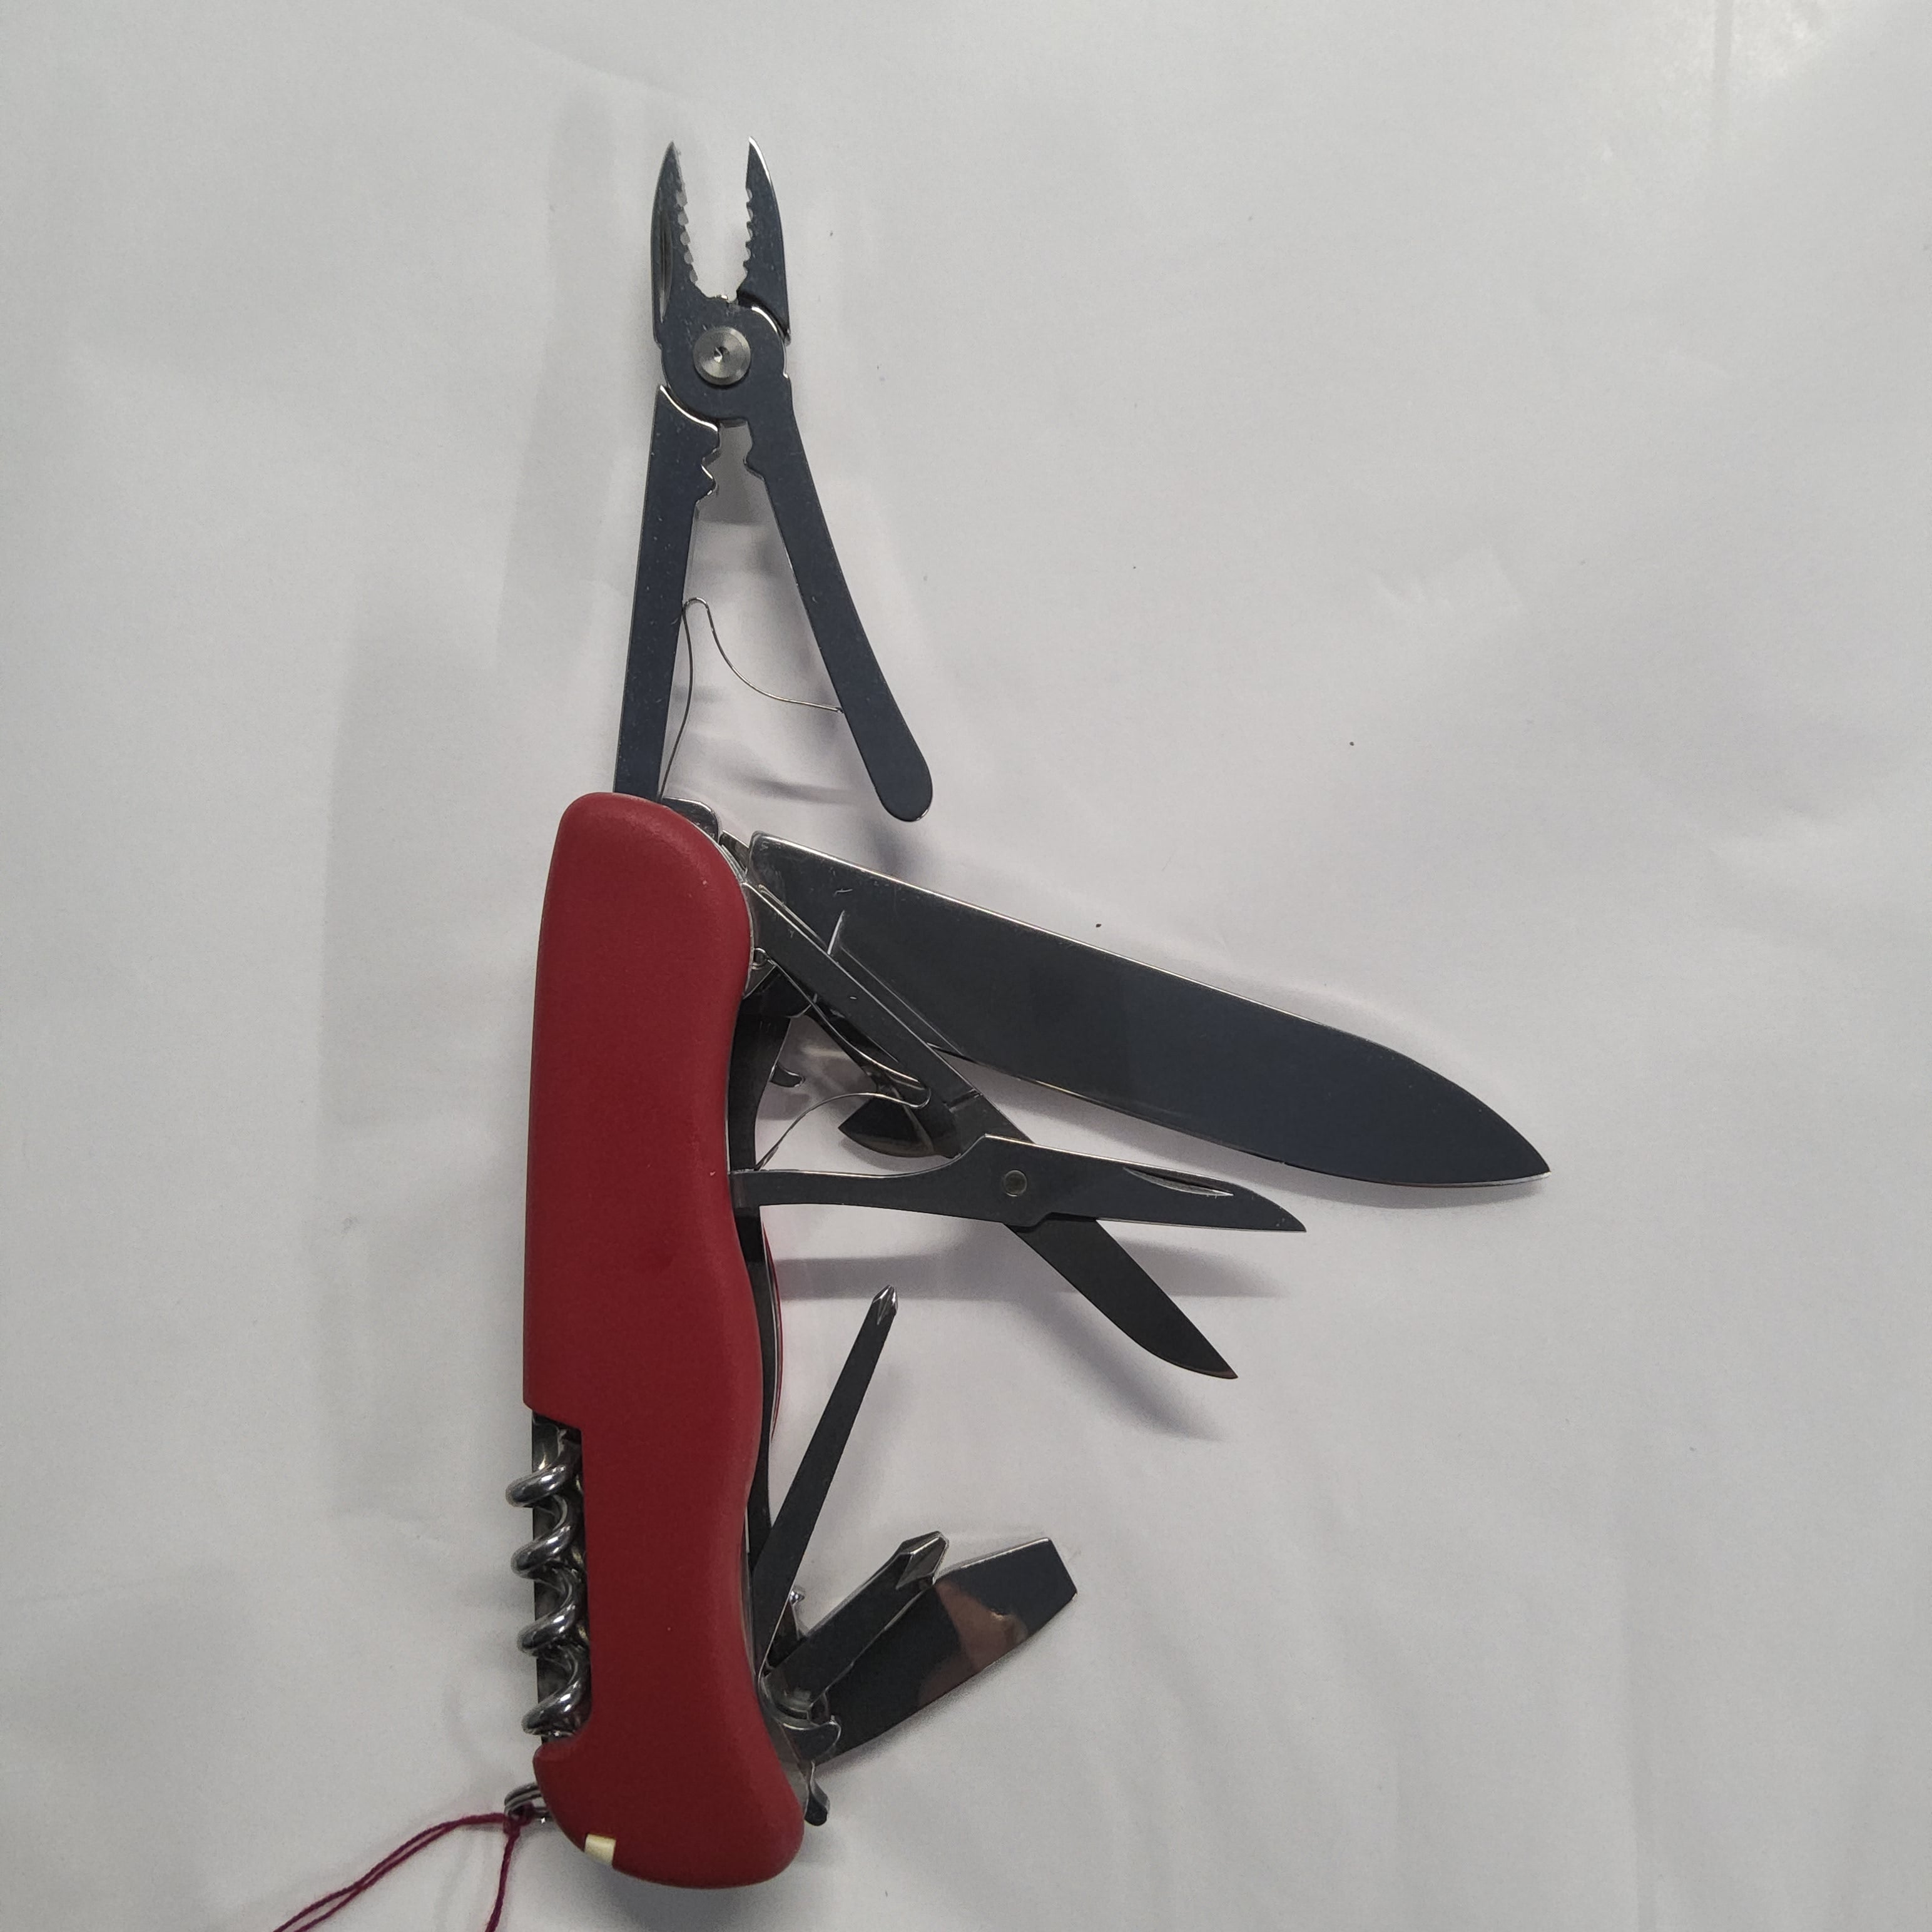 Swiss Army Knife - Hercules - Red - 18 Functions - 111mm - 0.8543